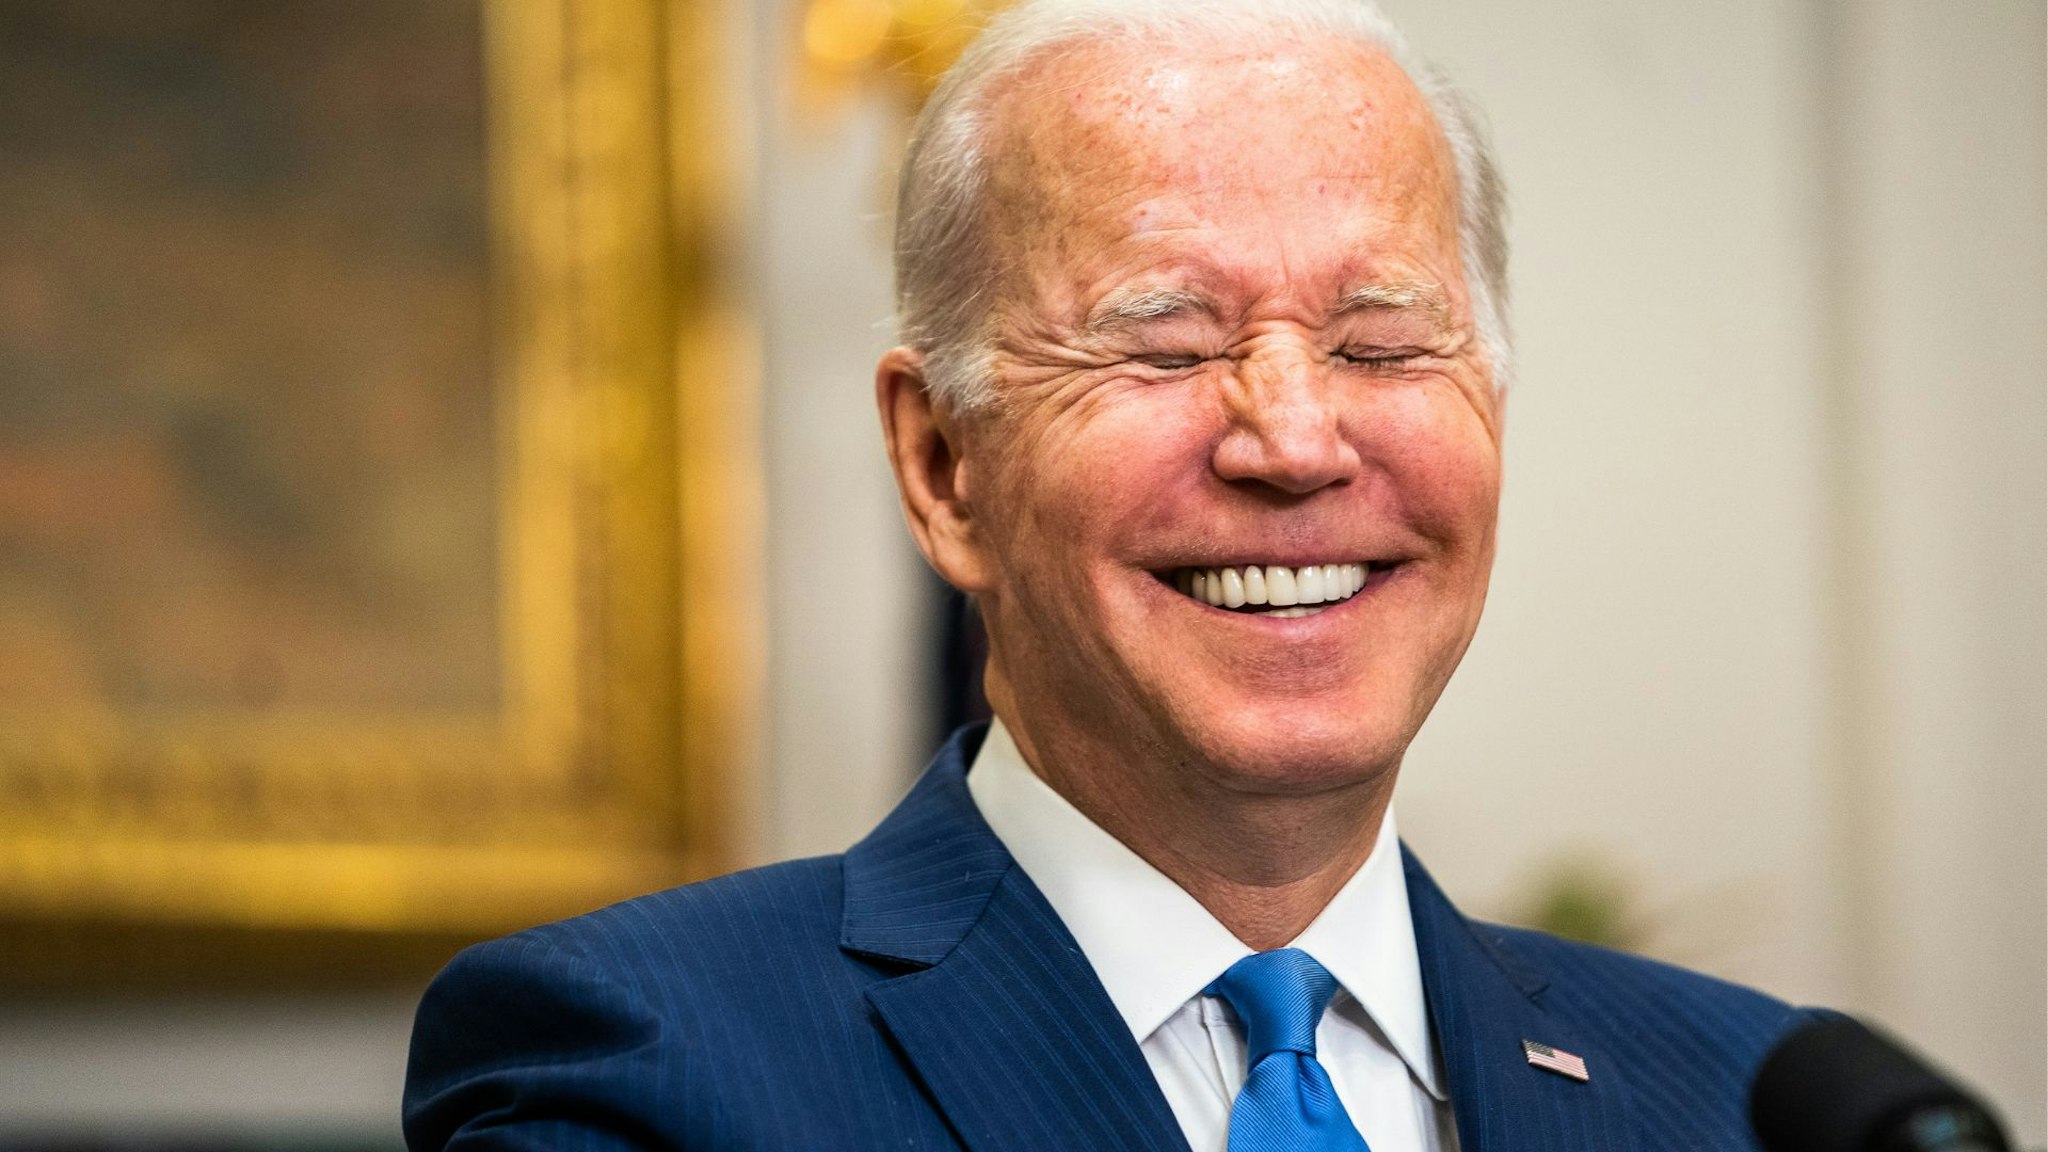 WASHINGTON, DC April 28, 2022: President Joe Biden laugh during questioning in the Roosevelt Room of The White House on Thursday April 28, 2022.